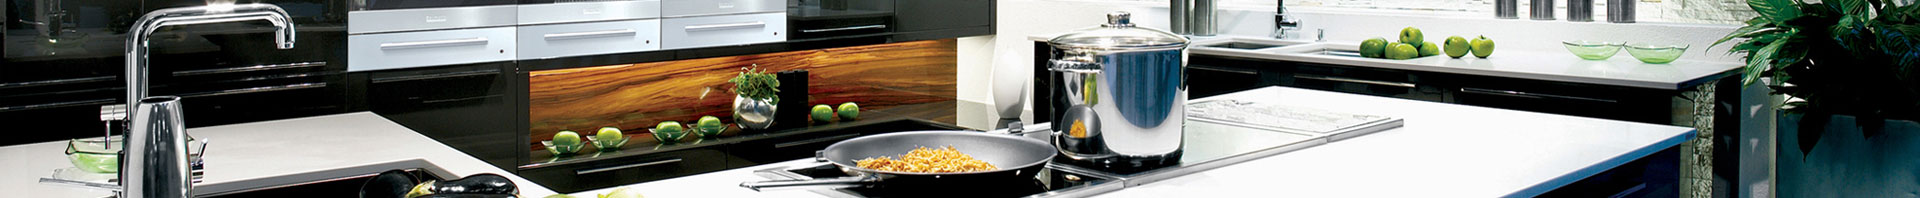 gas_cooktops_banner